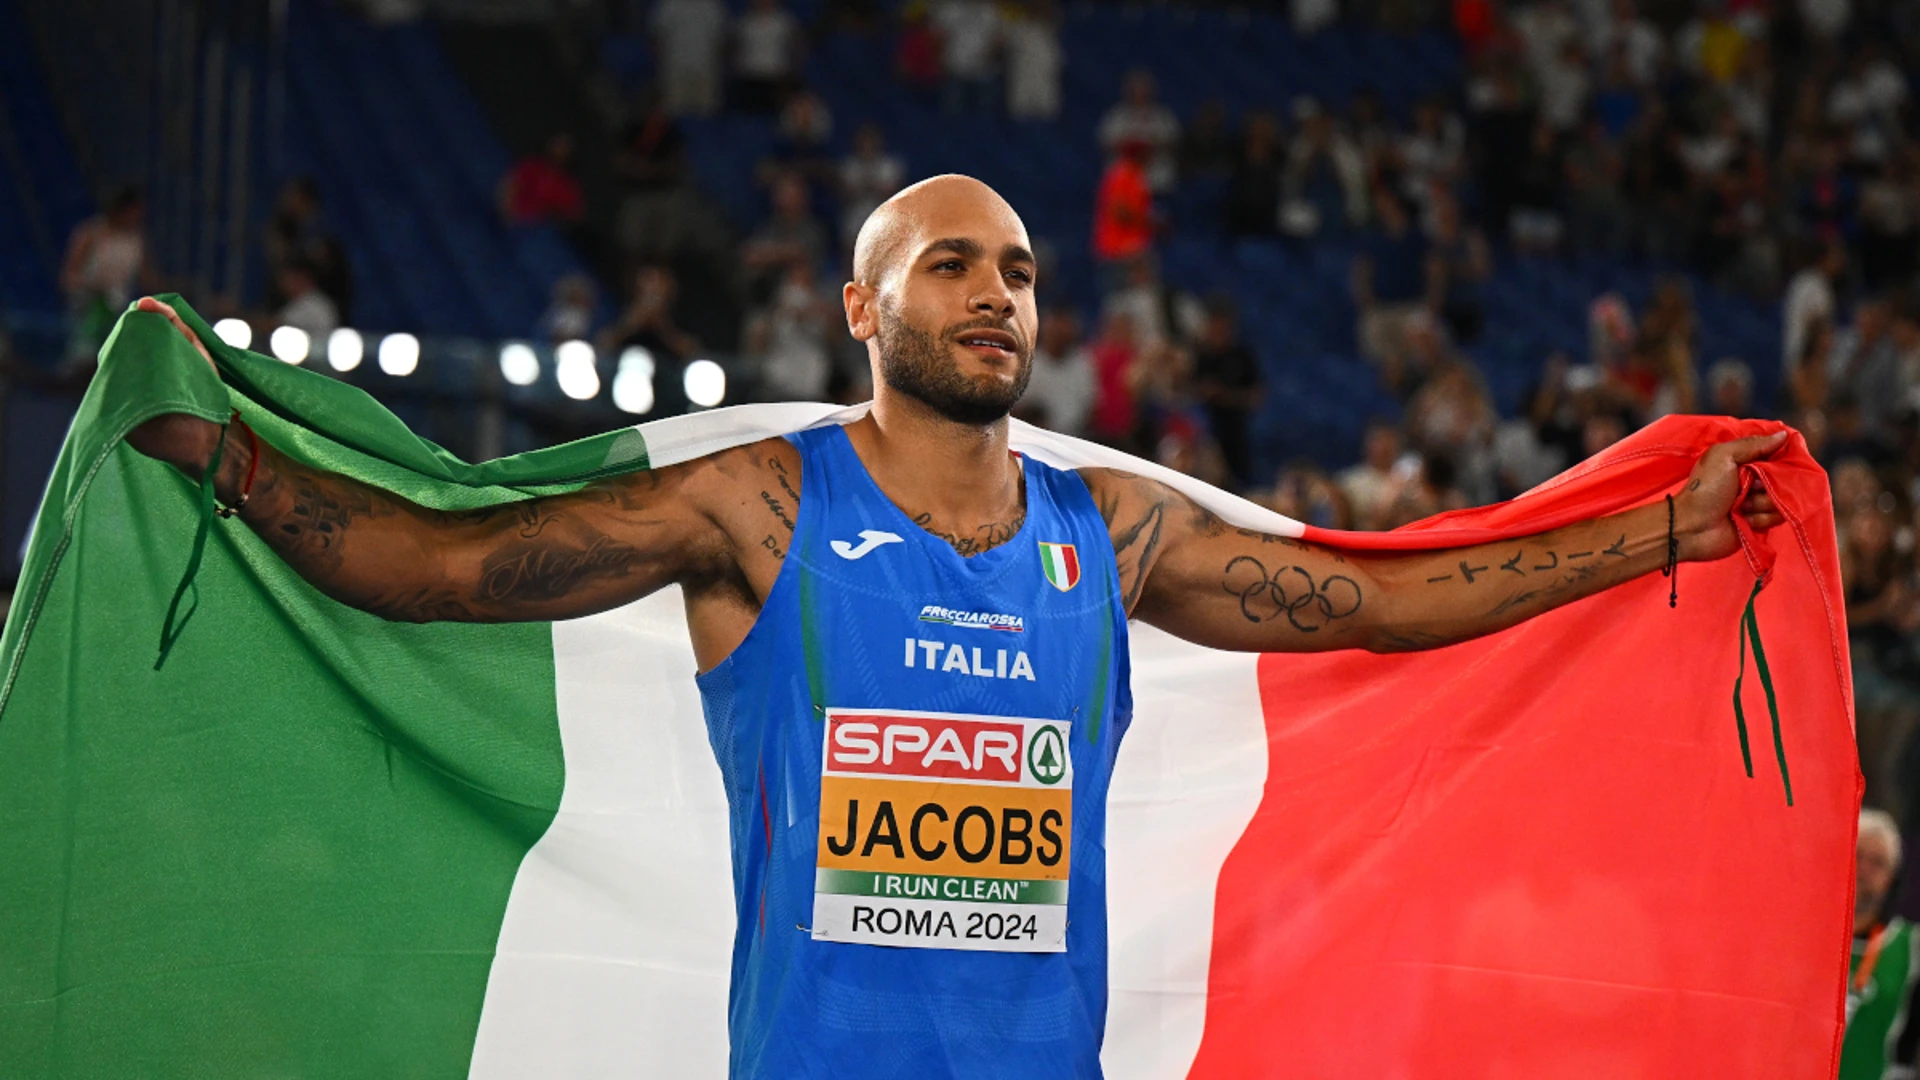 Italy's Jacobs runs best time since Tokyo Games victory